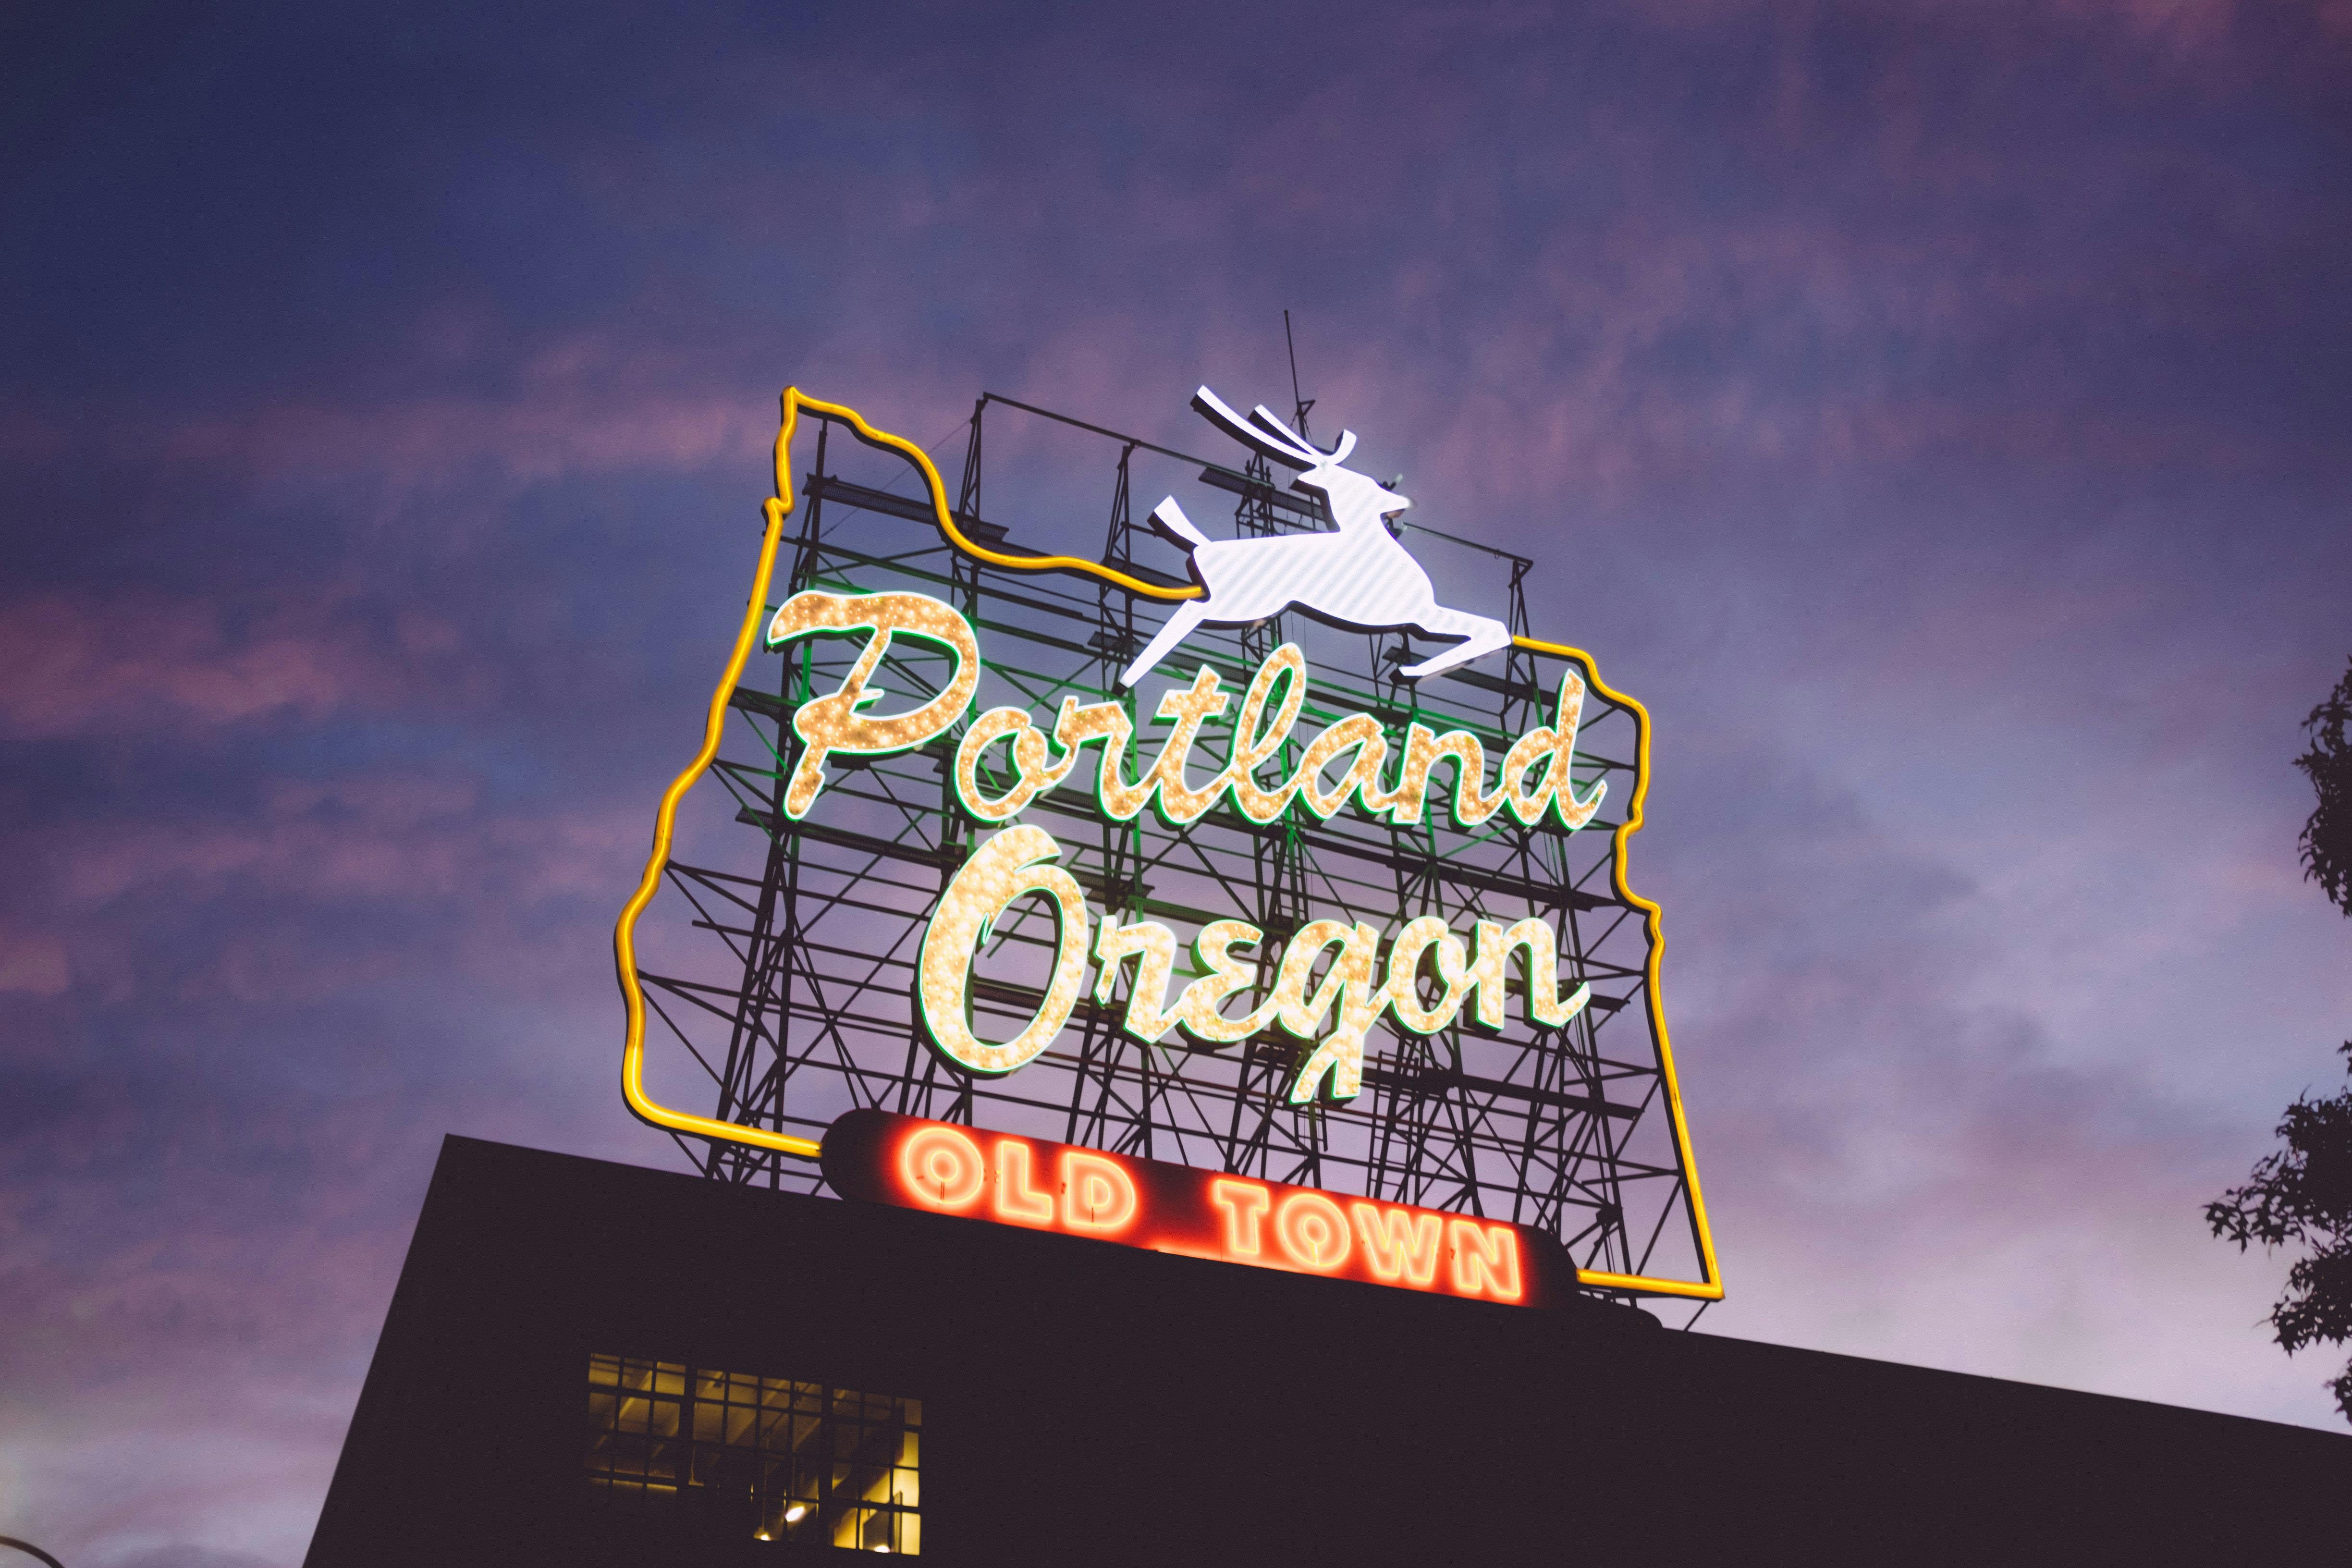 daily-wag-top-destinations-in-oregon-to-visit-this-holiday-season-2021-hero-image